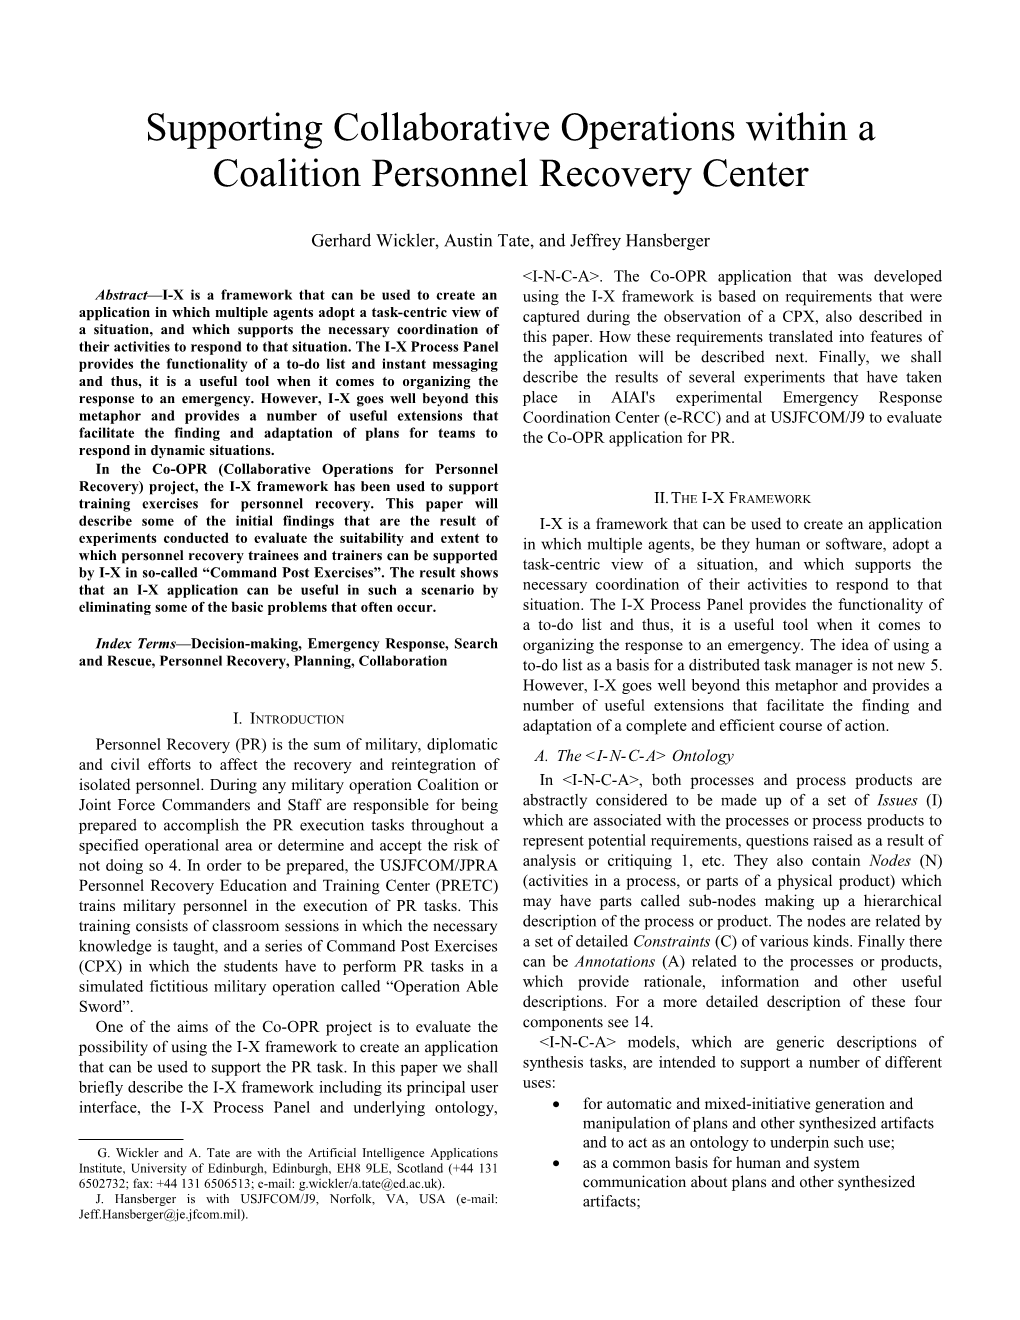 Supporting Collaborative Operations Within a Coalition Personnel Recovery Center